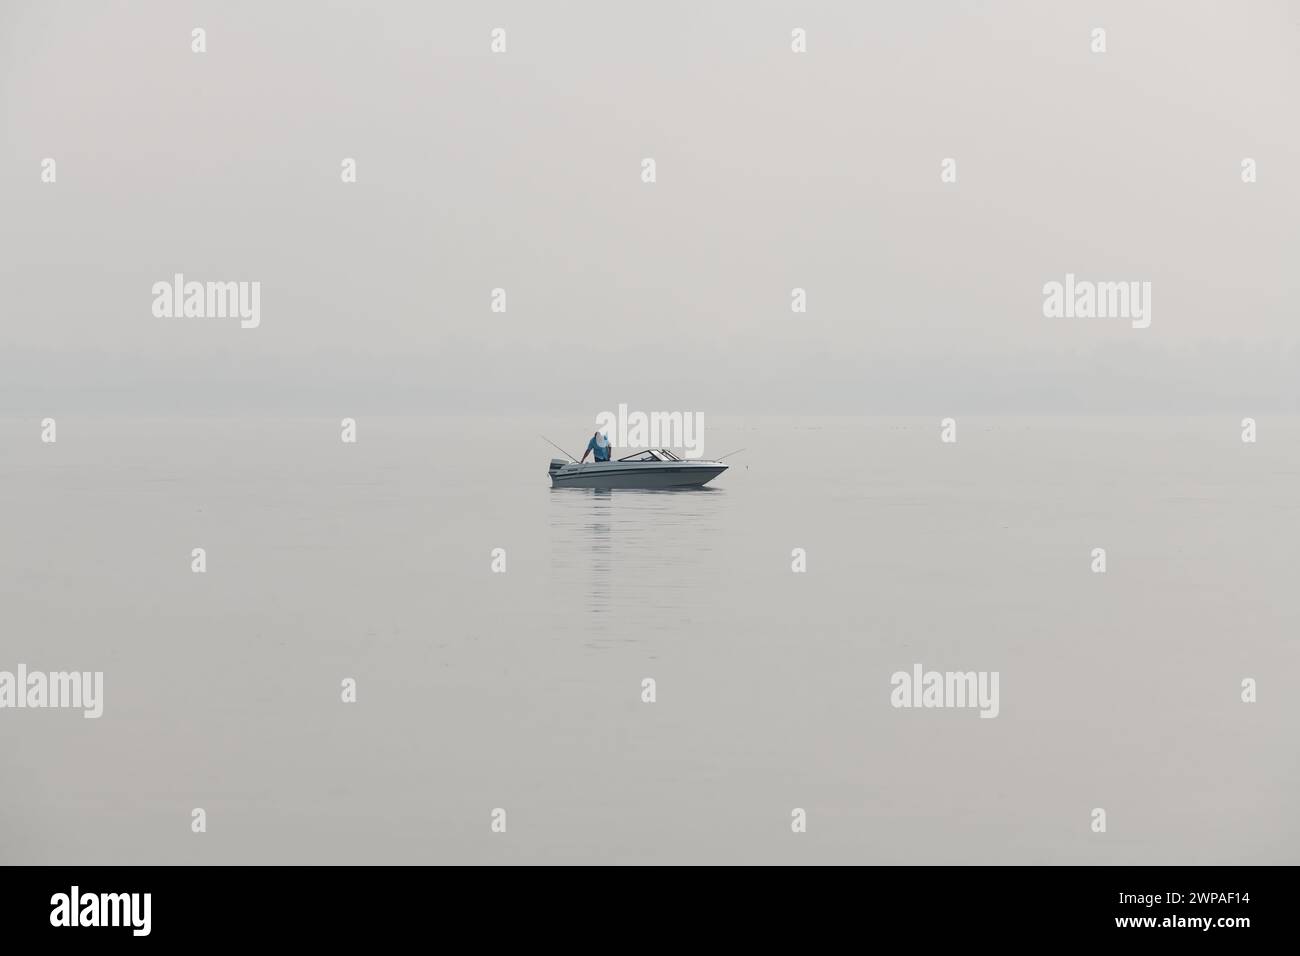 A fisherman on a boat in Lake Wabamun during poor visability due to forest fire smoke pollution in Alberta, Canada Stock Photo